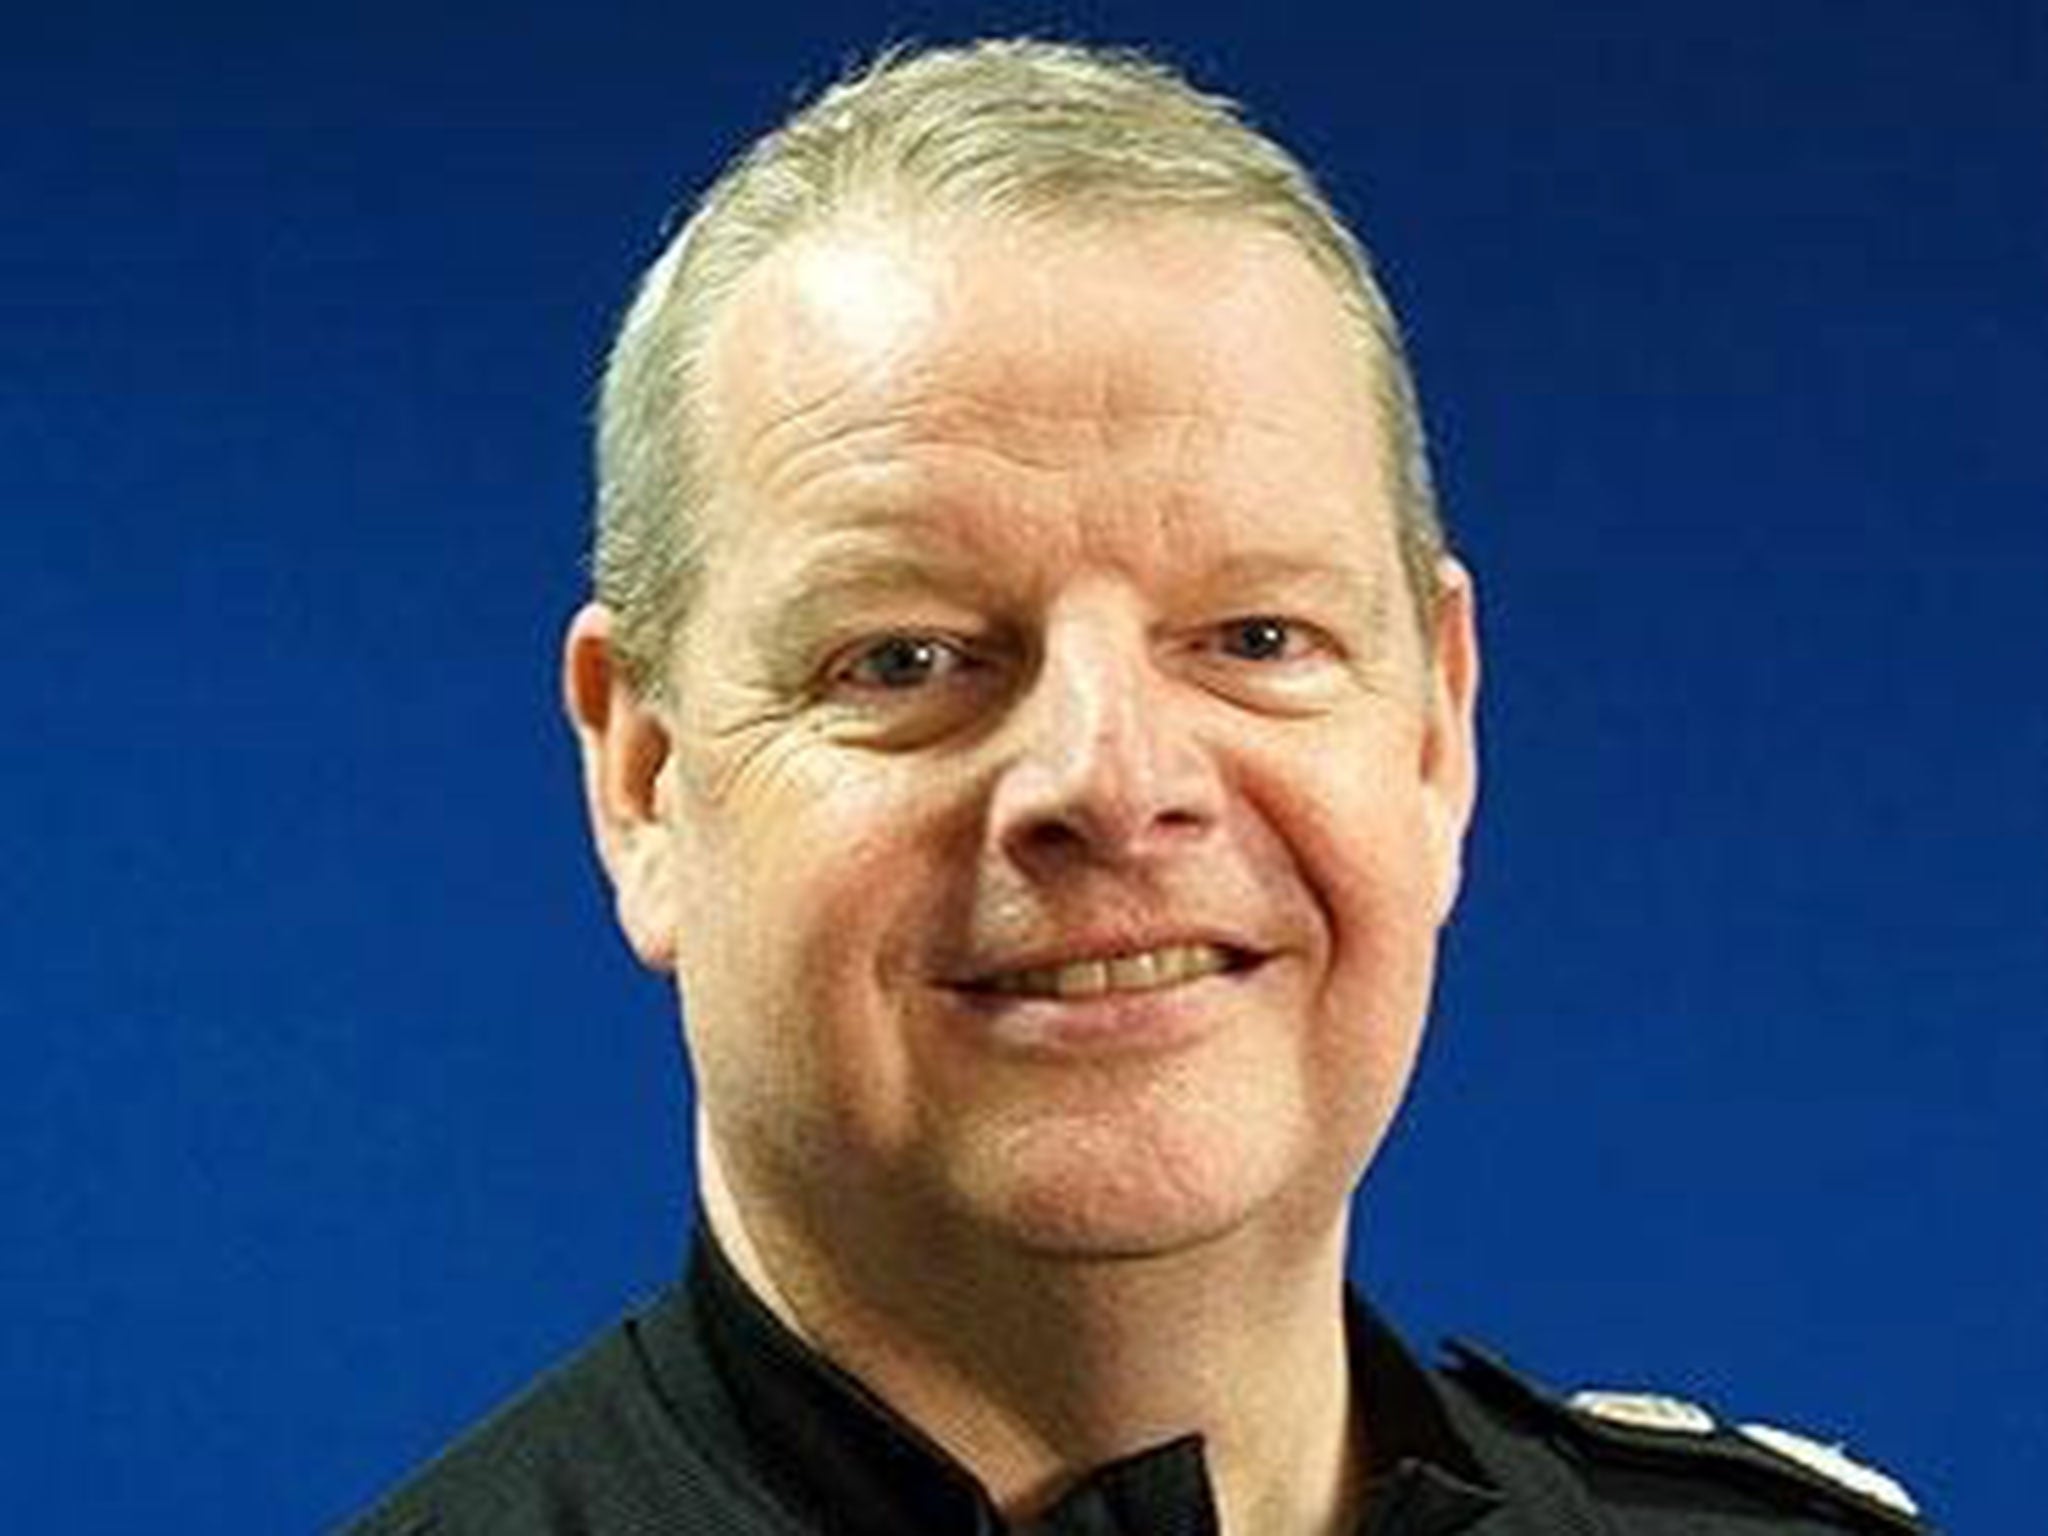 Simon Byrne has been suspended from his role as Chief Constable of Cheshire Police